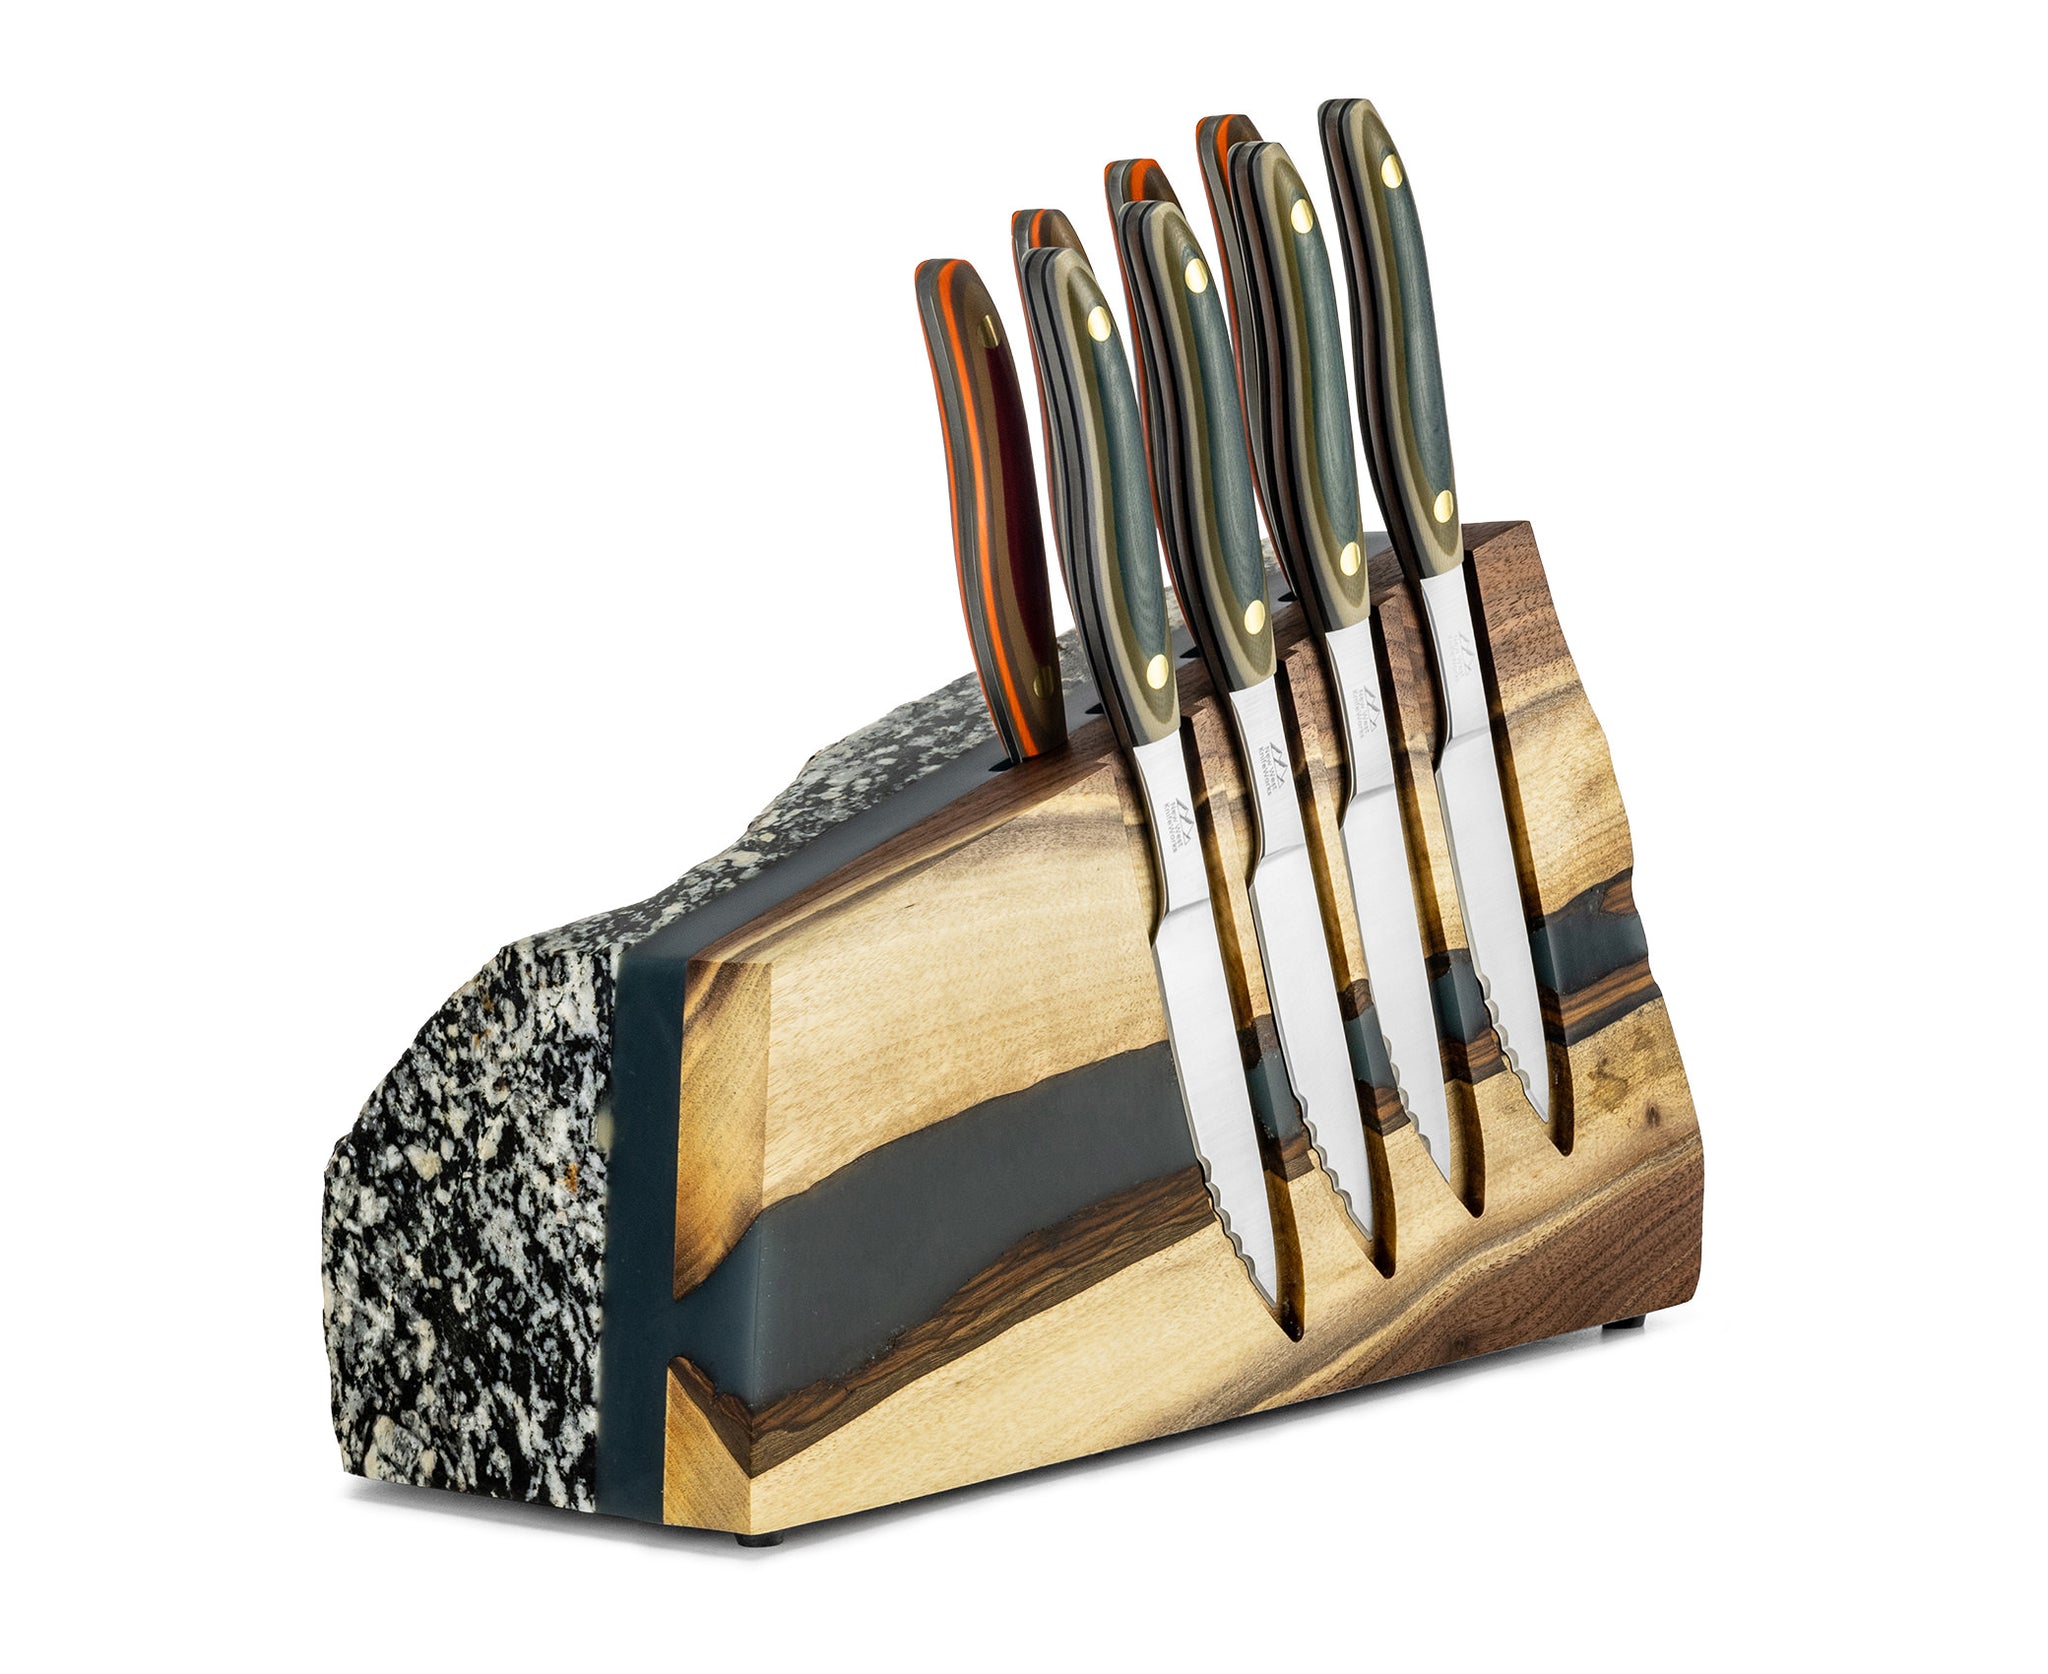 American Industrial - Steak Knife Set Of 12 With Chest